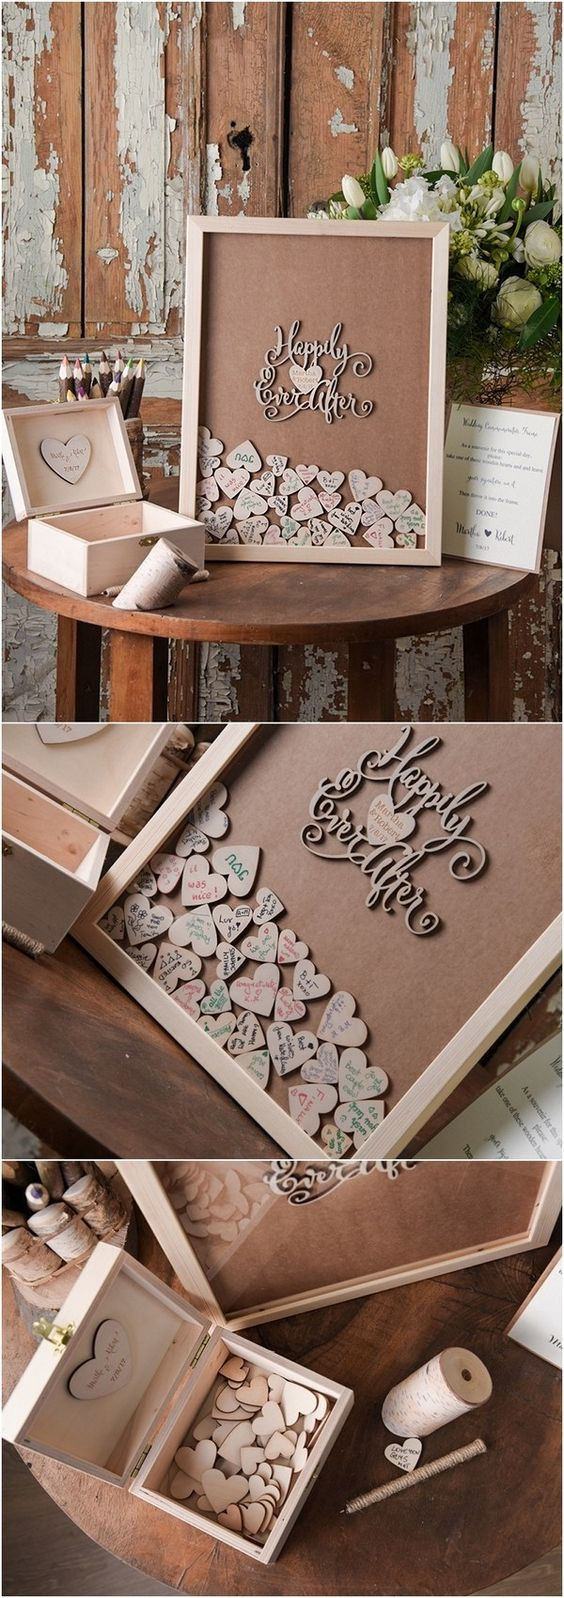 Unique Guest Book Ideas For Weddings
 22 of Our Favorite Unique Wedding Guest Book Ideas Page 2